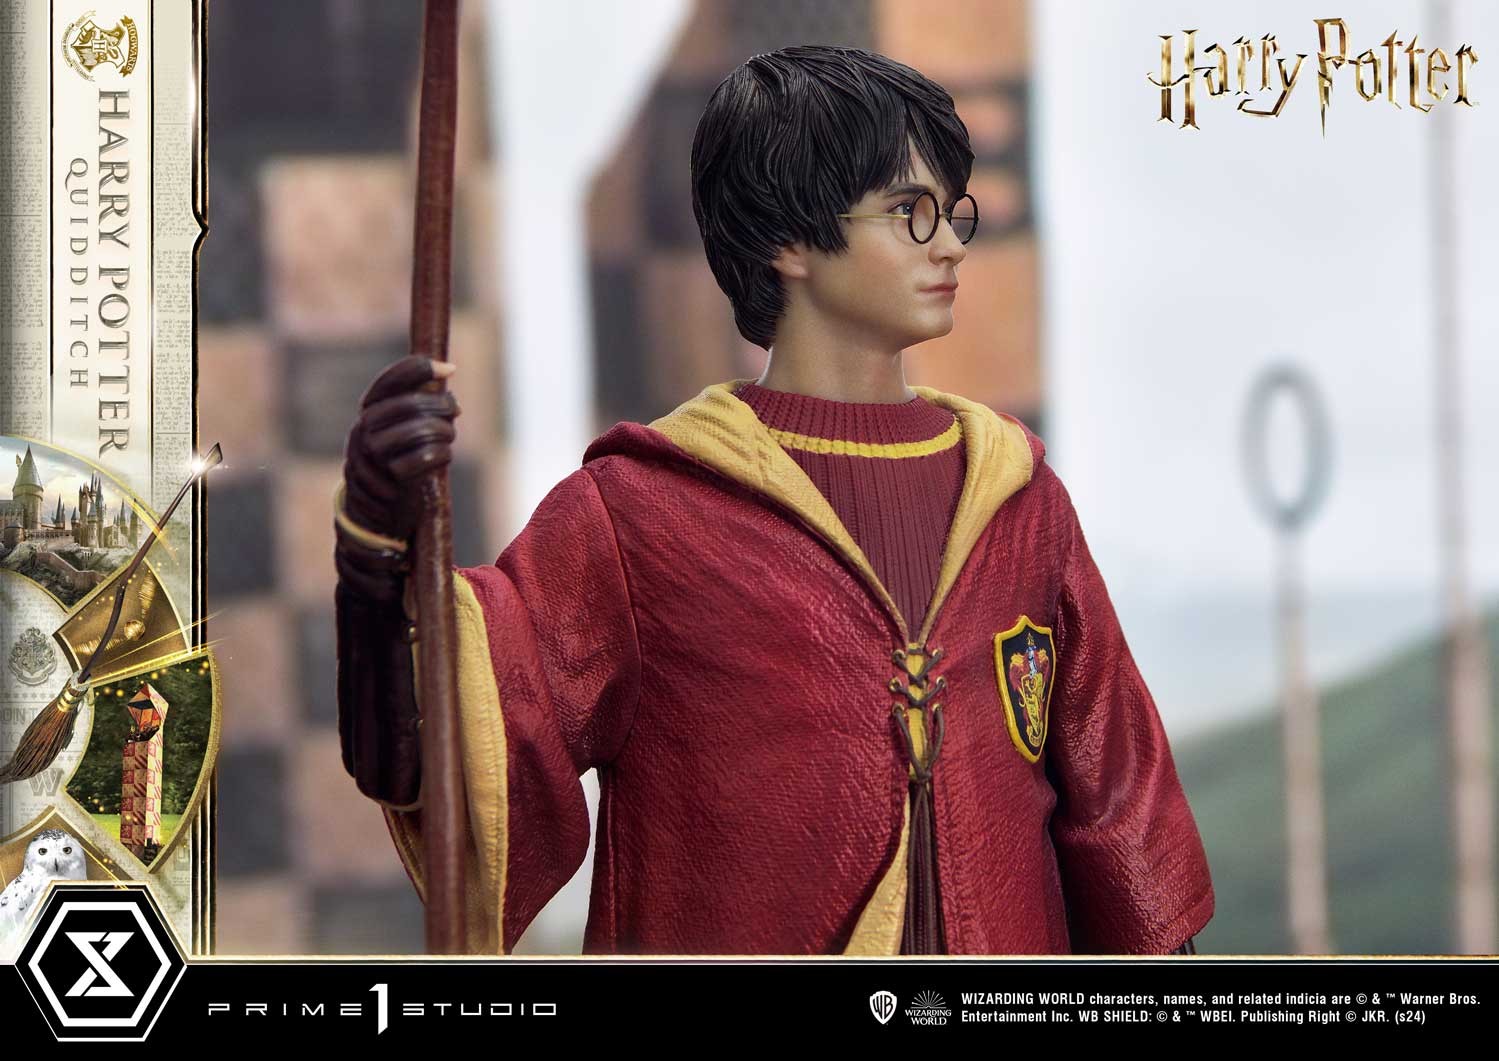 Harry Potter (Quidditch Edition) (Prototype Shown) View 5